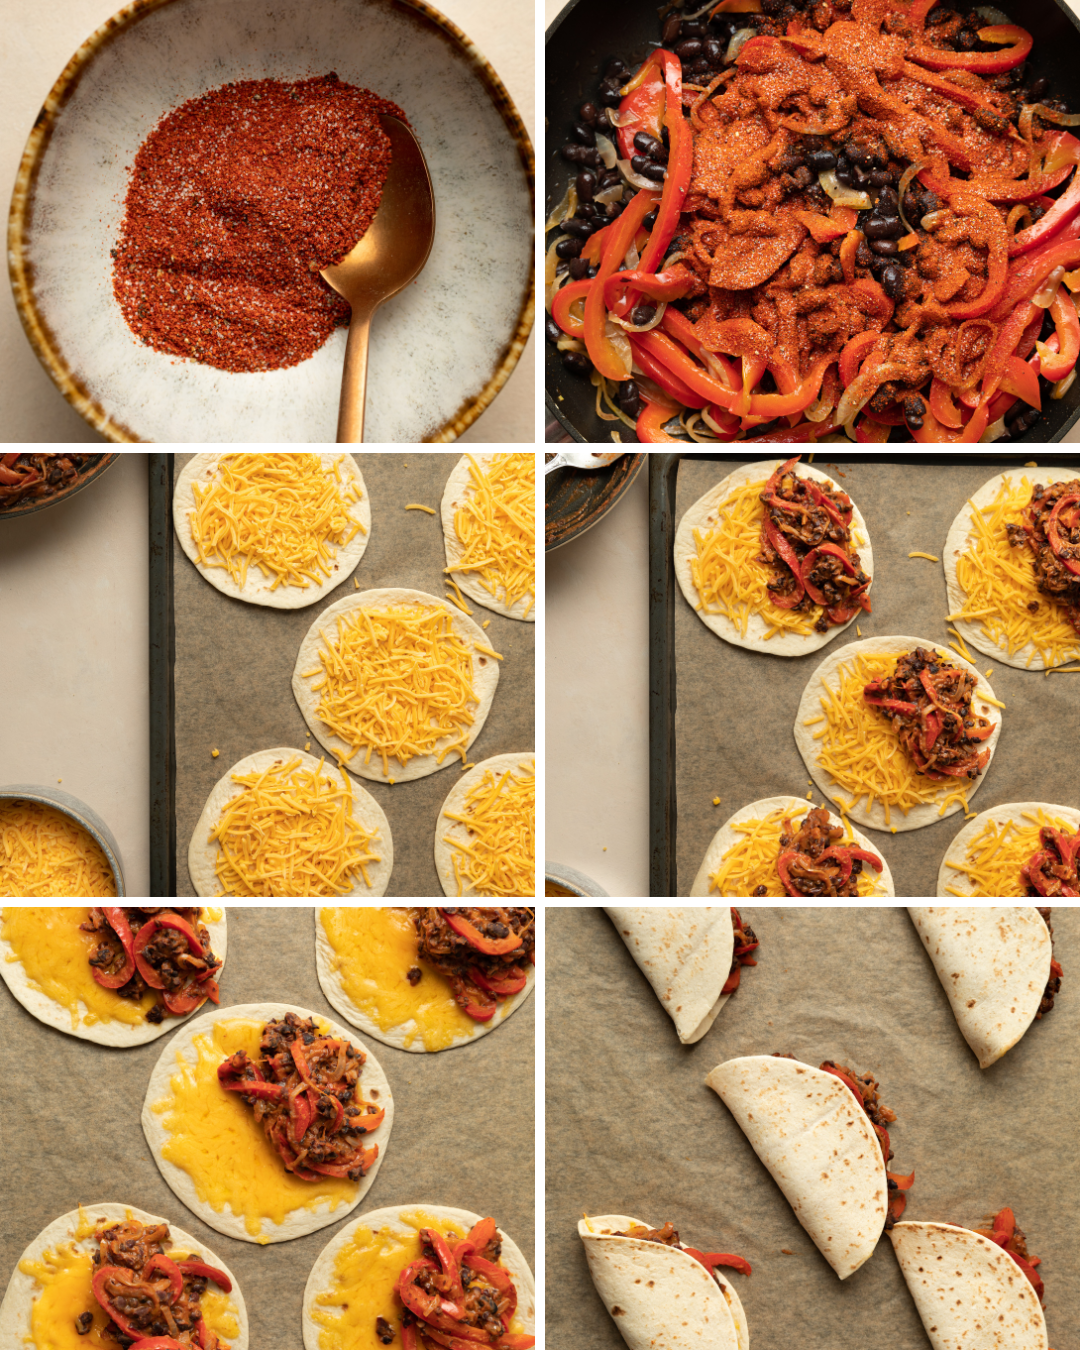 Step by step assembly for black bean taco recipe